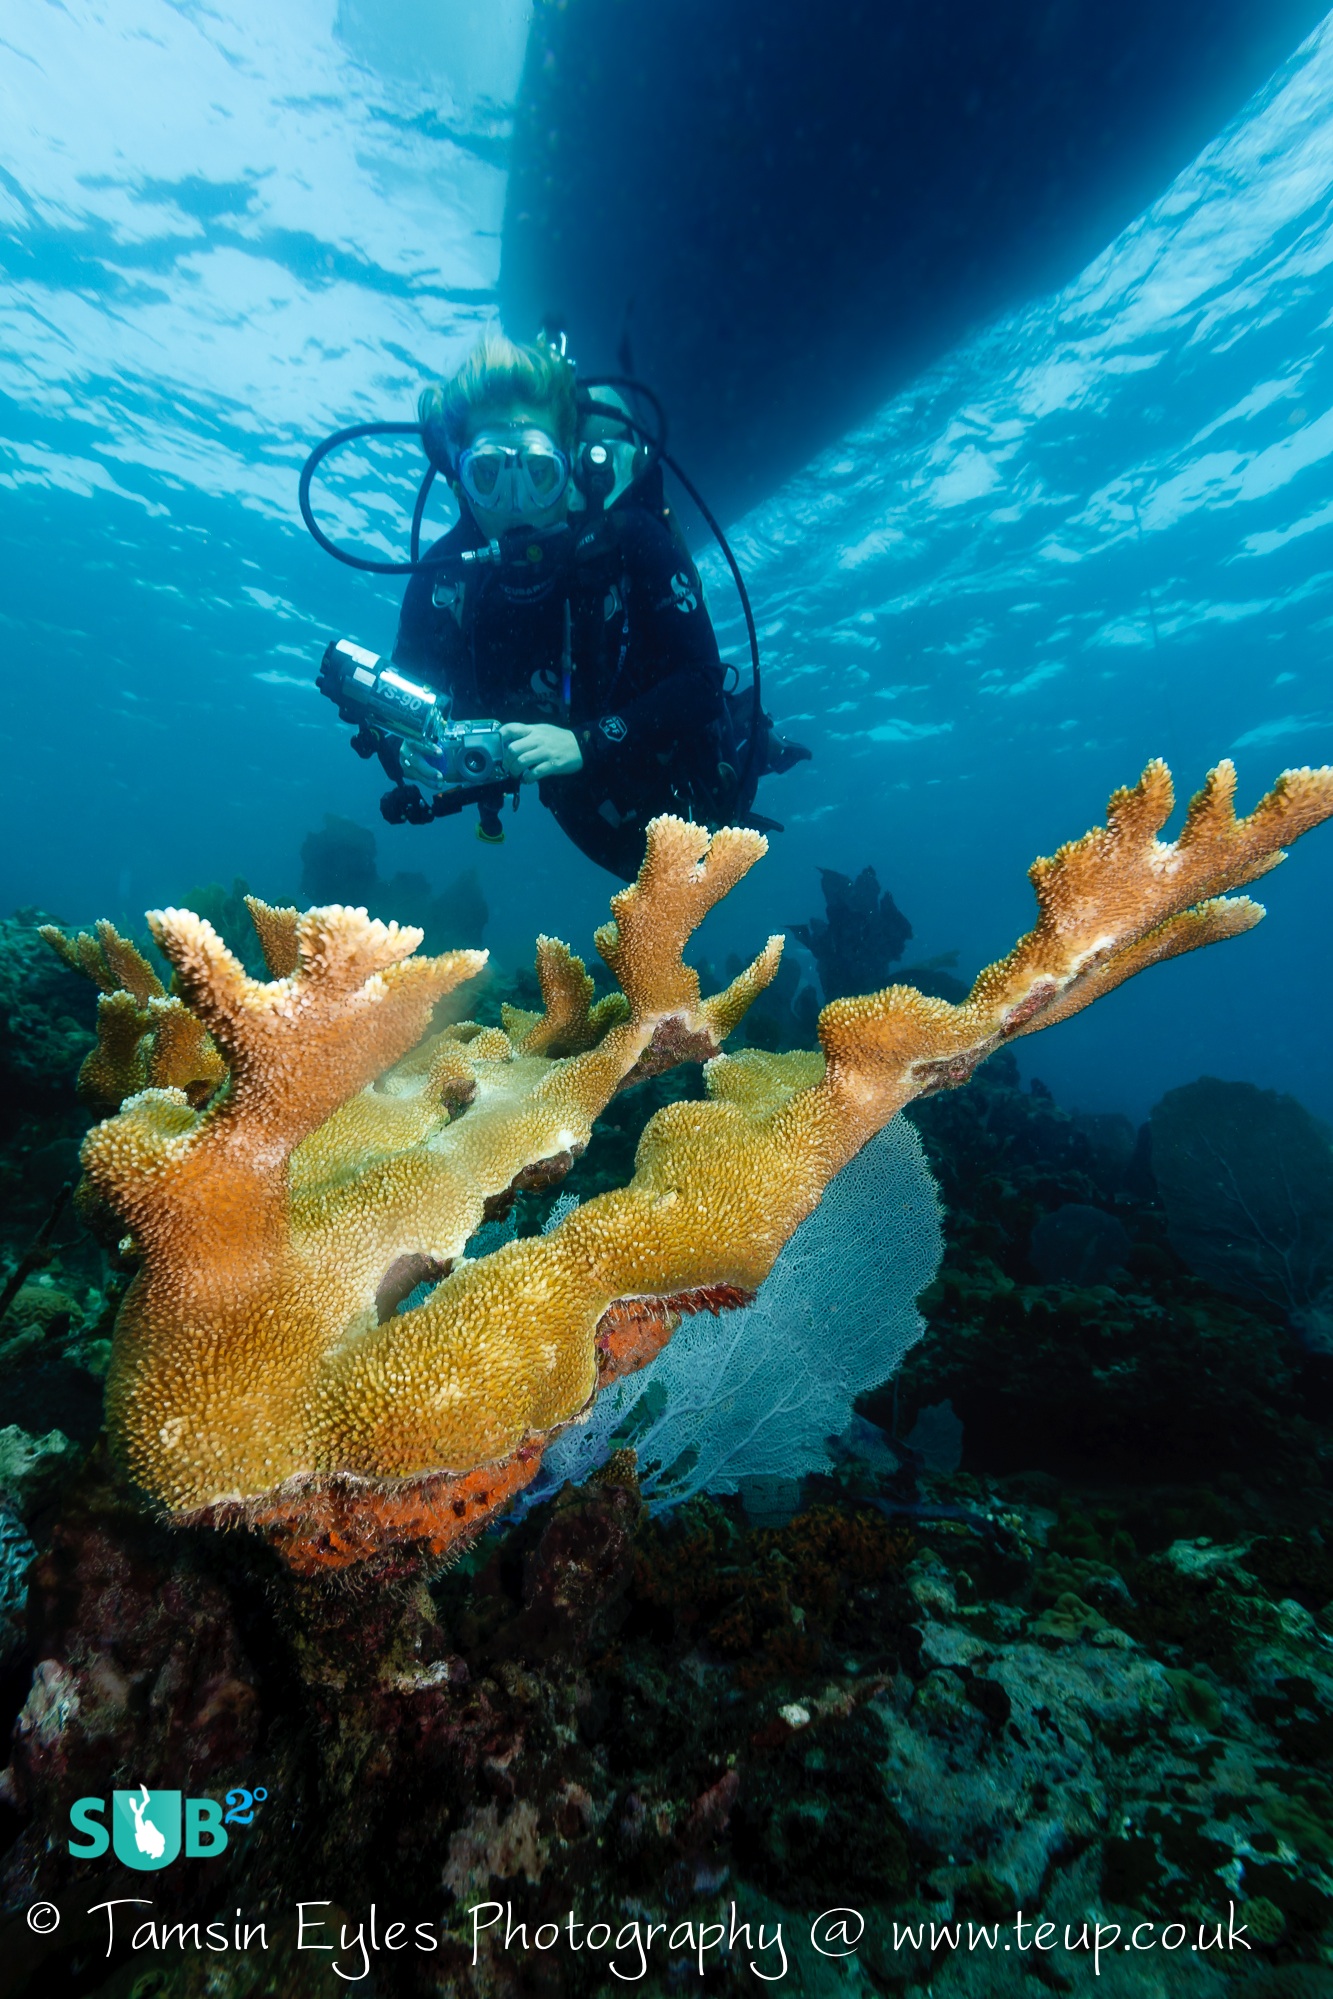 Divers find elkhorn coral formations along many of the reefs in Bequia. Photo courtesy of Tamsin Eyles.